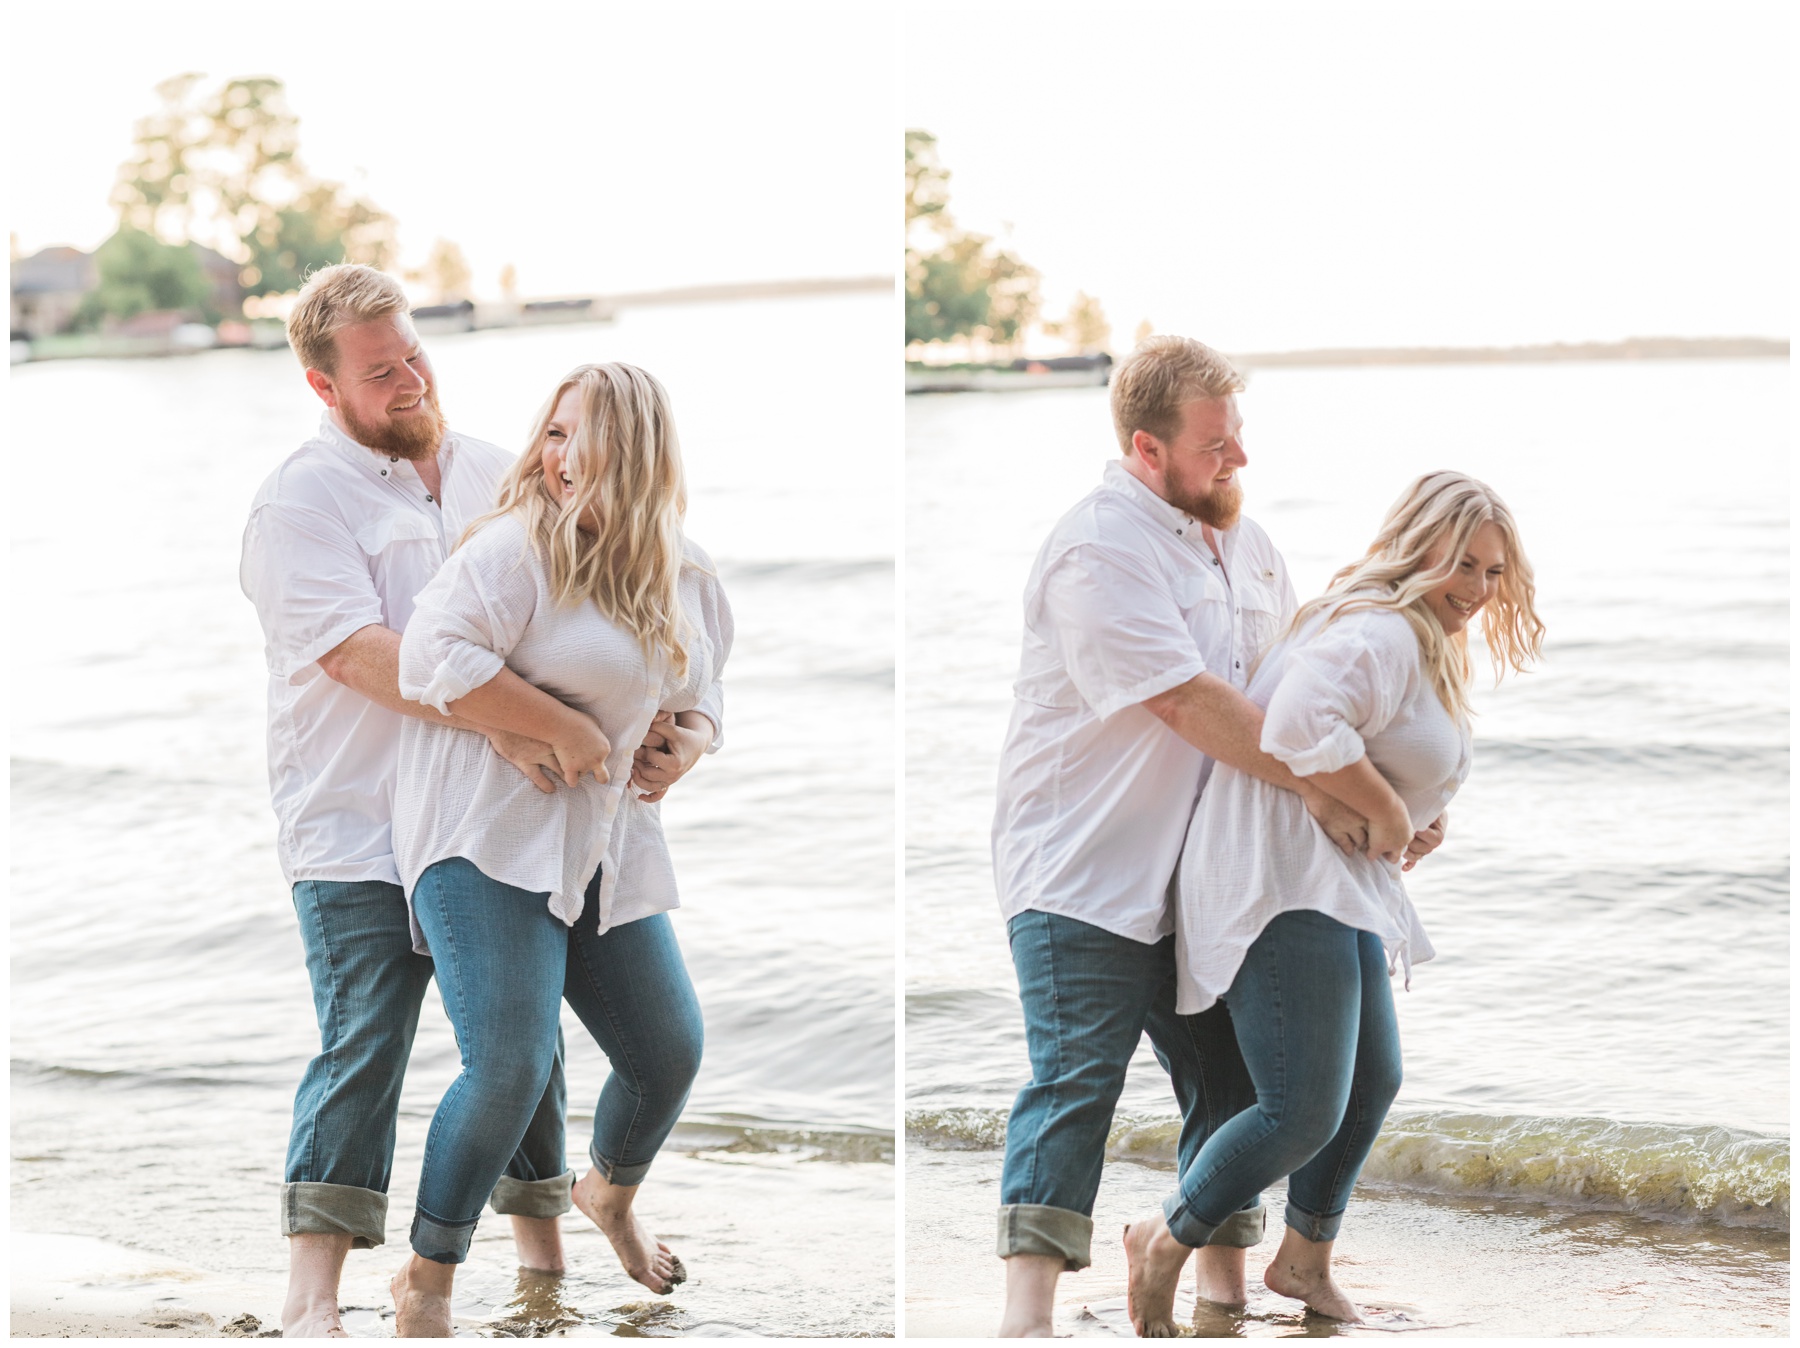 Bride and groom wearing matching white button-down shirts and jeans for their engagement session